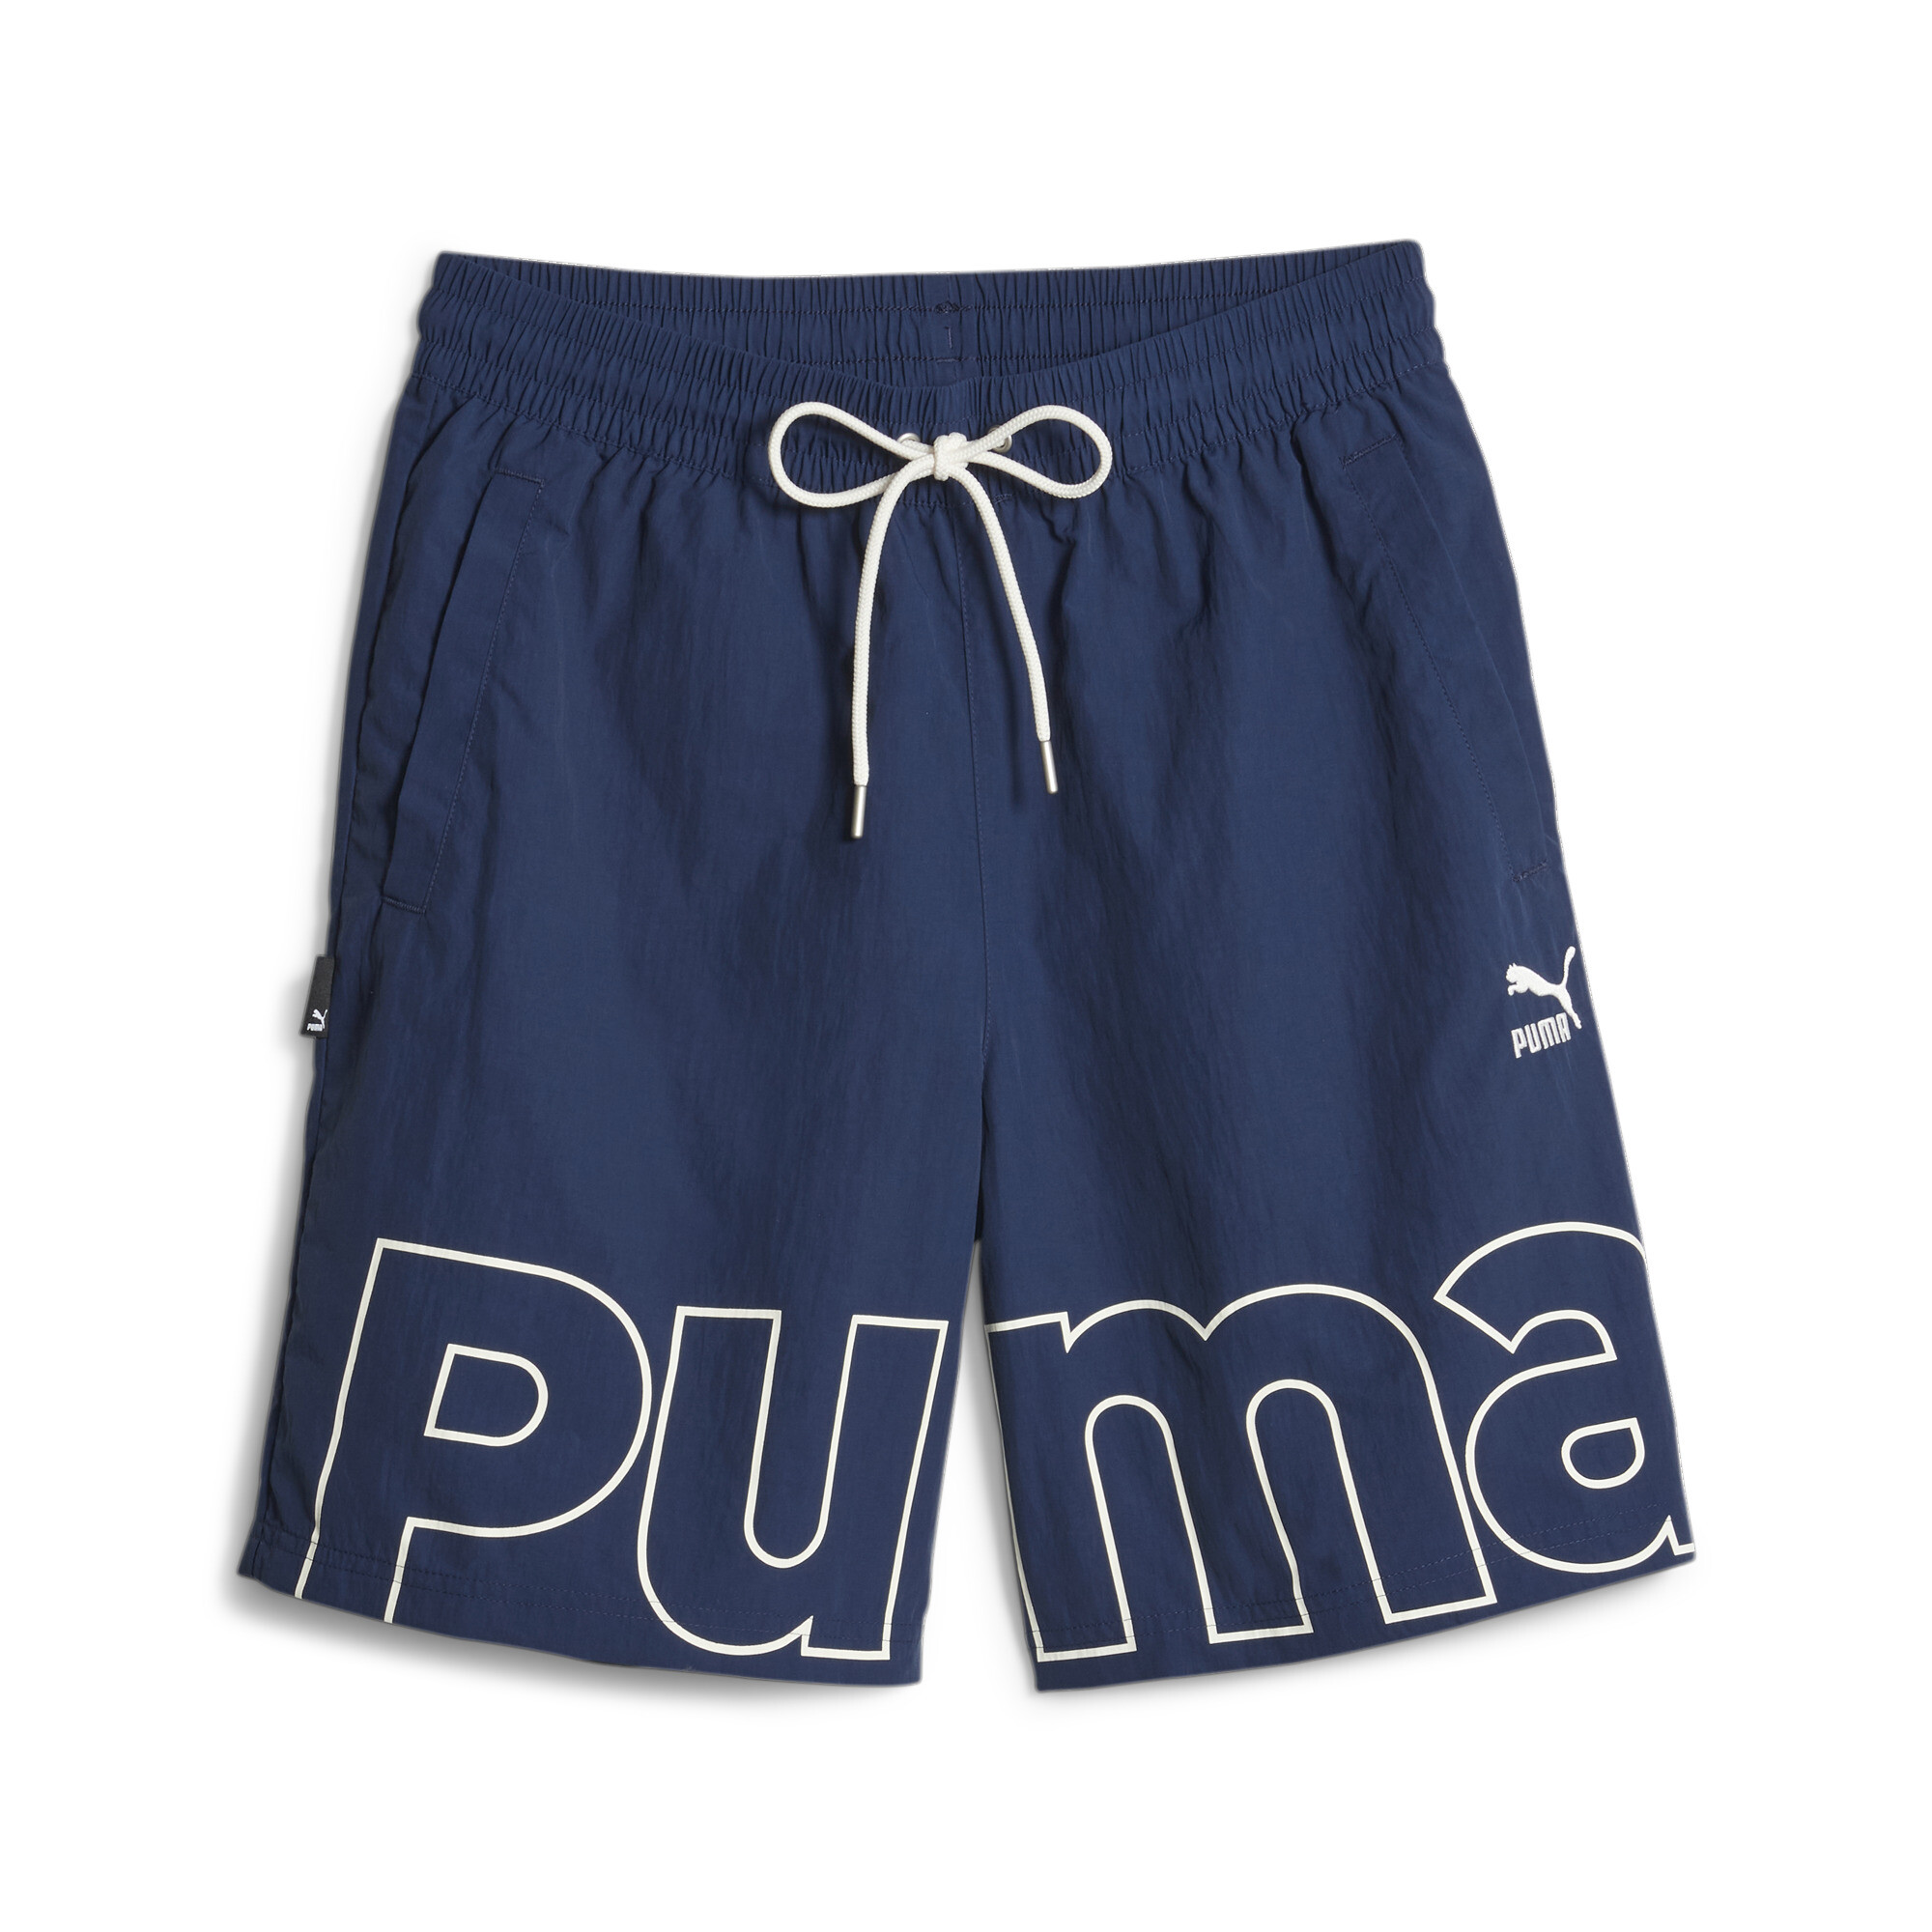 Men's PUMA TEAM Relaxed Shorts In Blue, Size XS